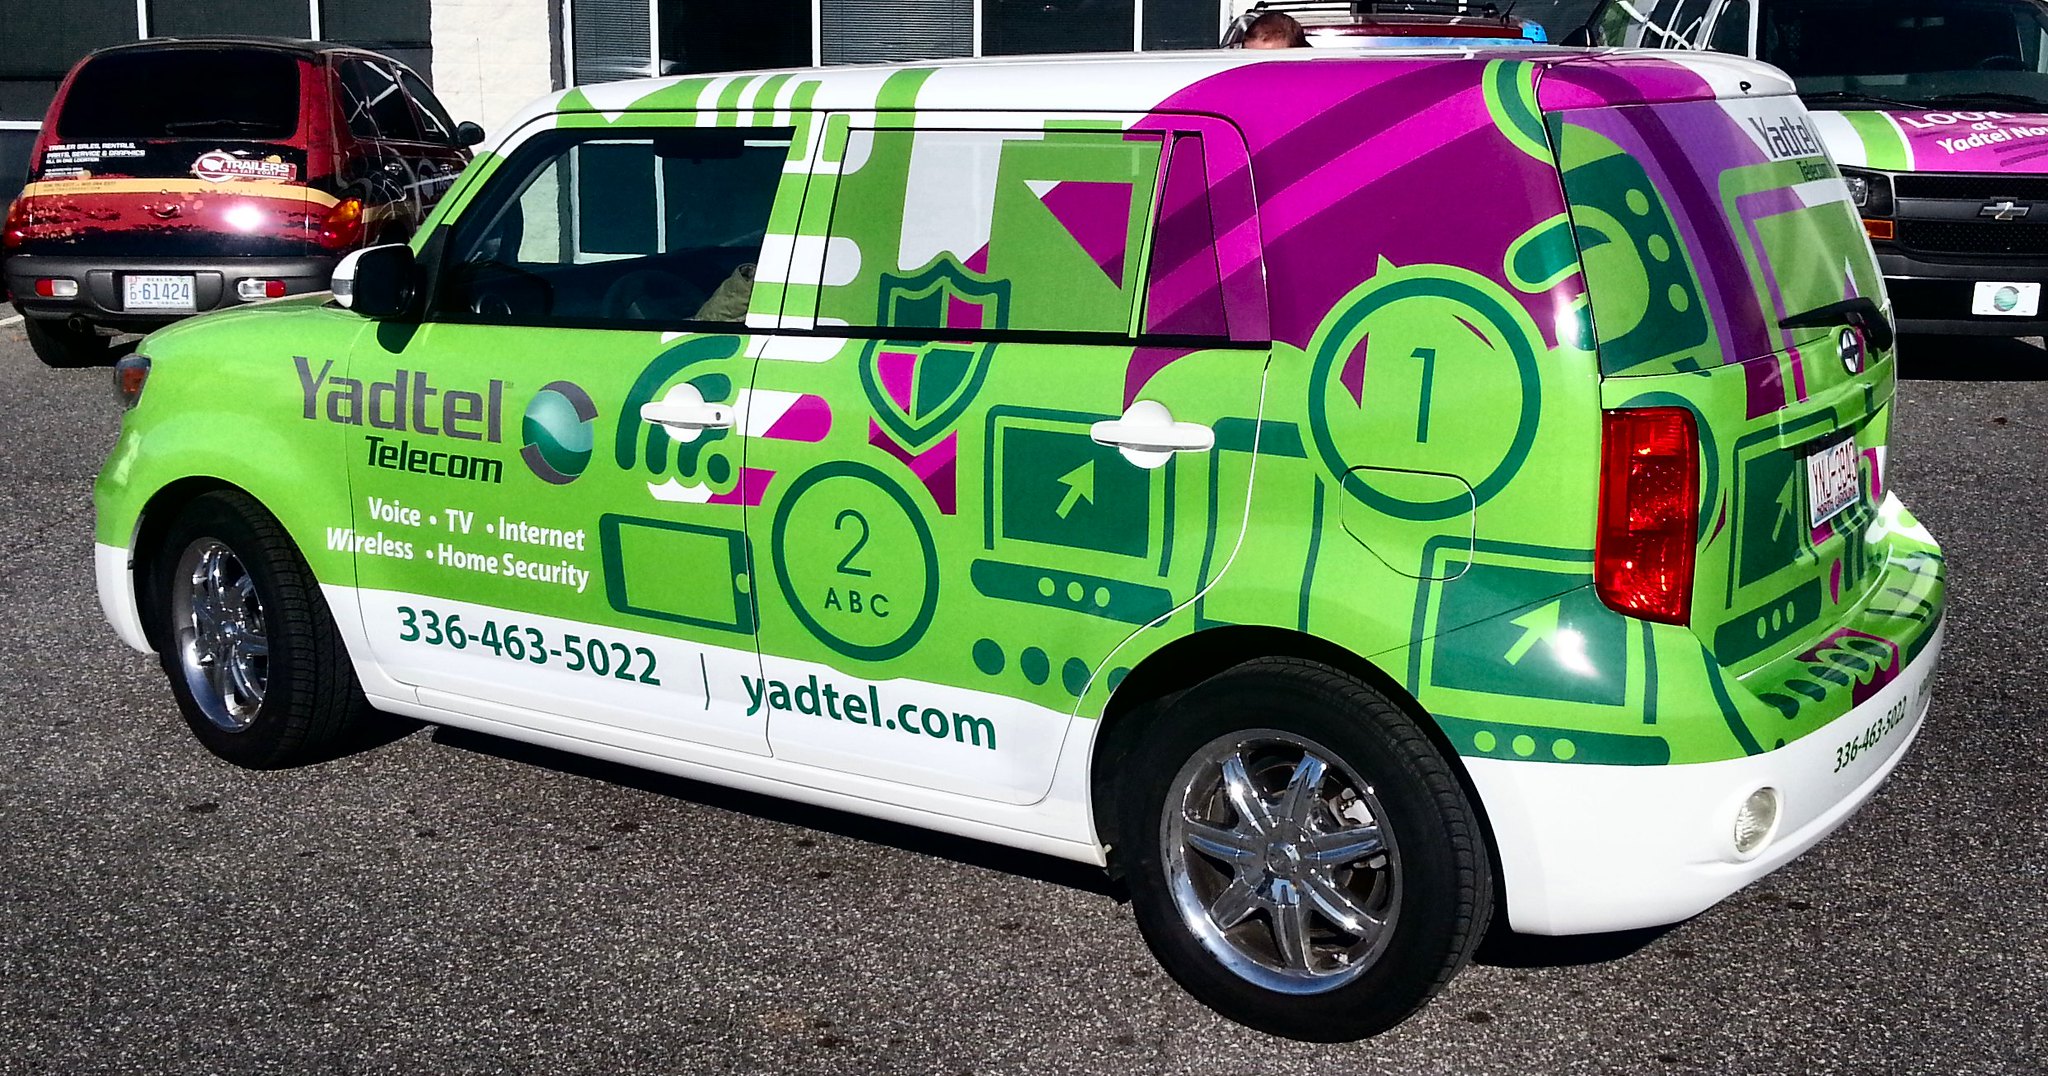 Yadtel Vehicle Wraps. Wrap advertising; image by Trailers of the East Coast, via Flickr.com, CC BY 2.0.